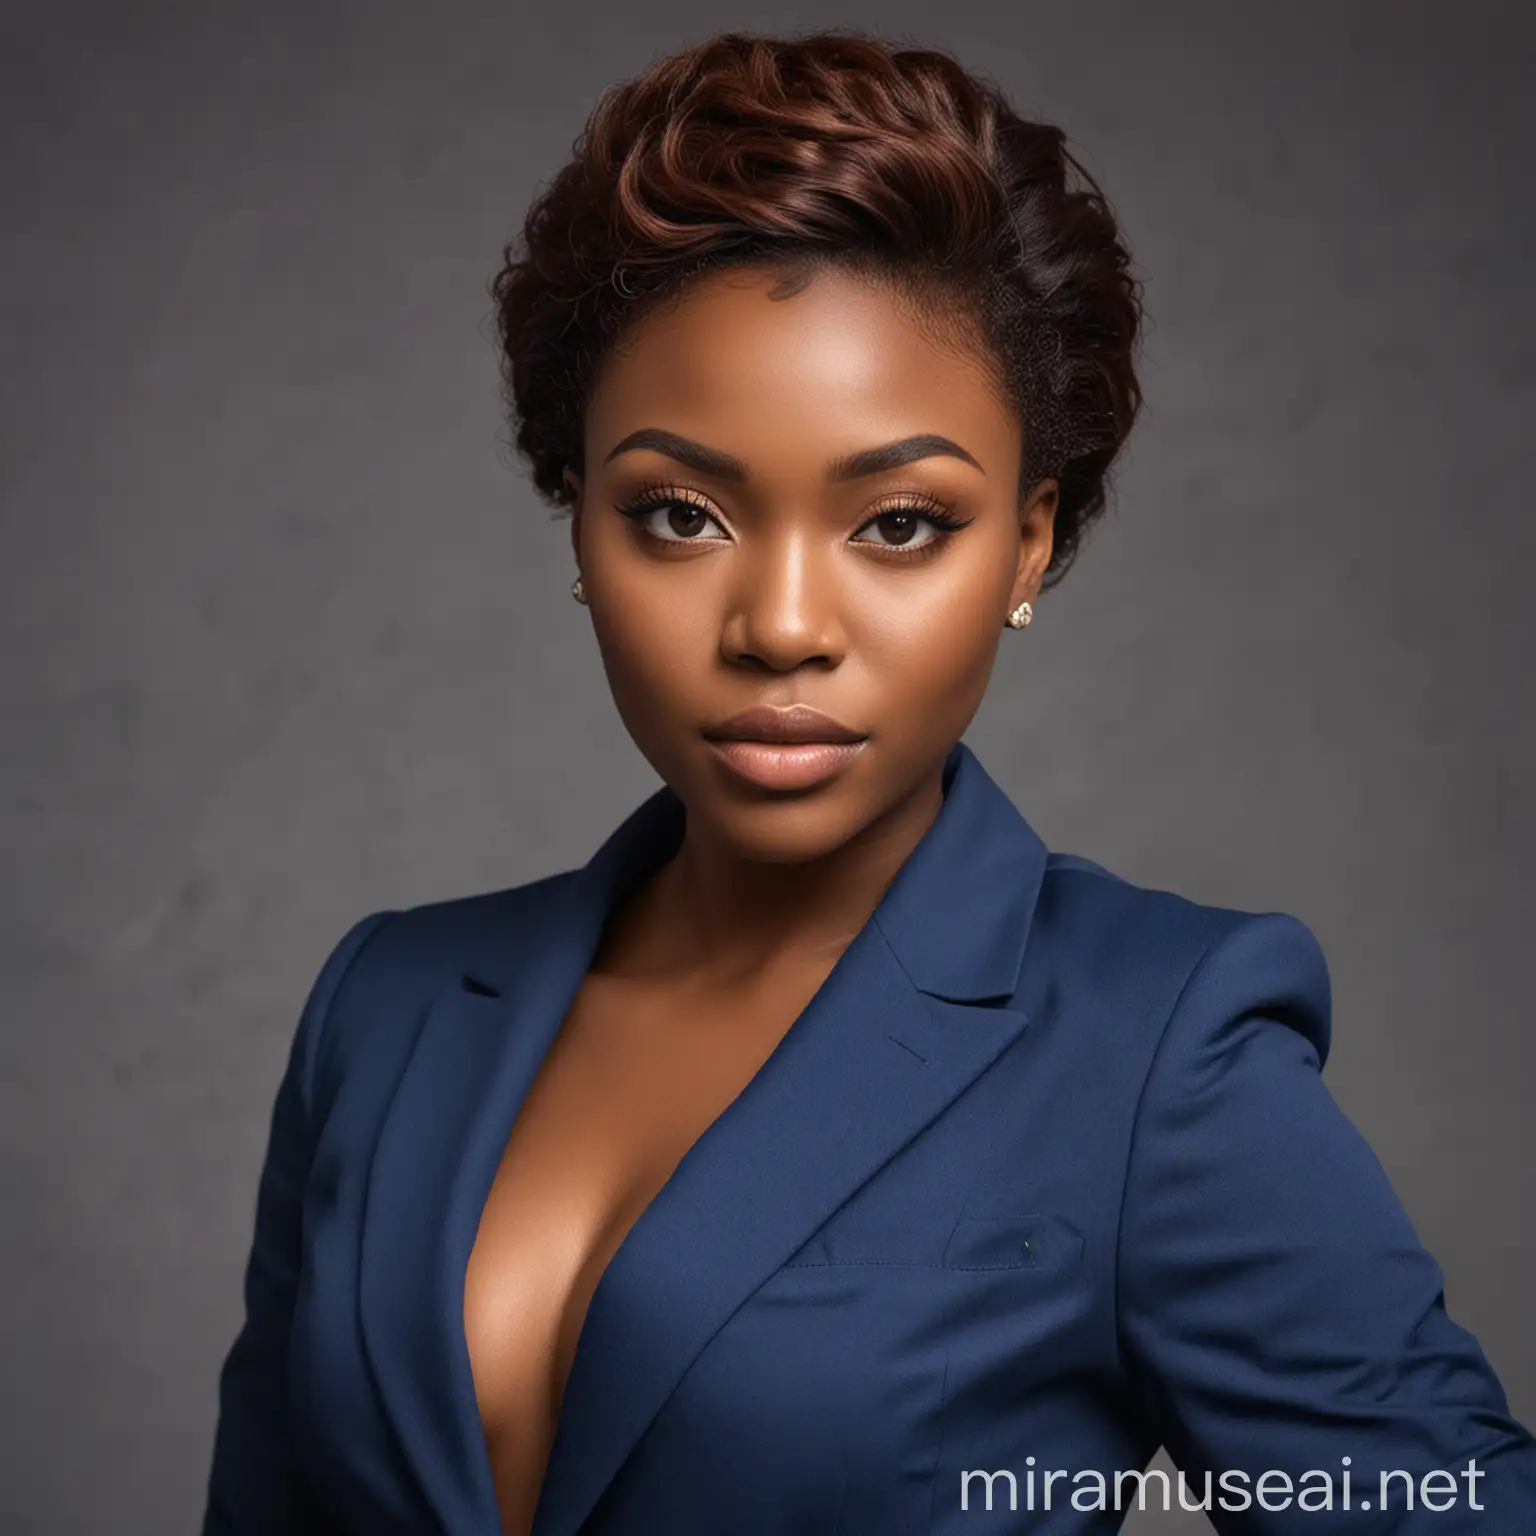 A PROFESSIONAL LADY WITH CHOCOLATE SKIN COLOR IN NIGERIAN WITH  BLUE SUIT  

